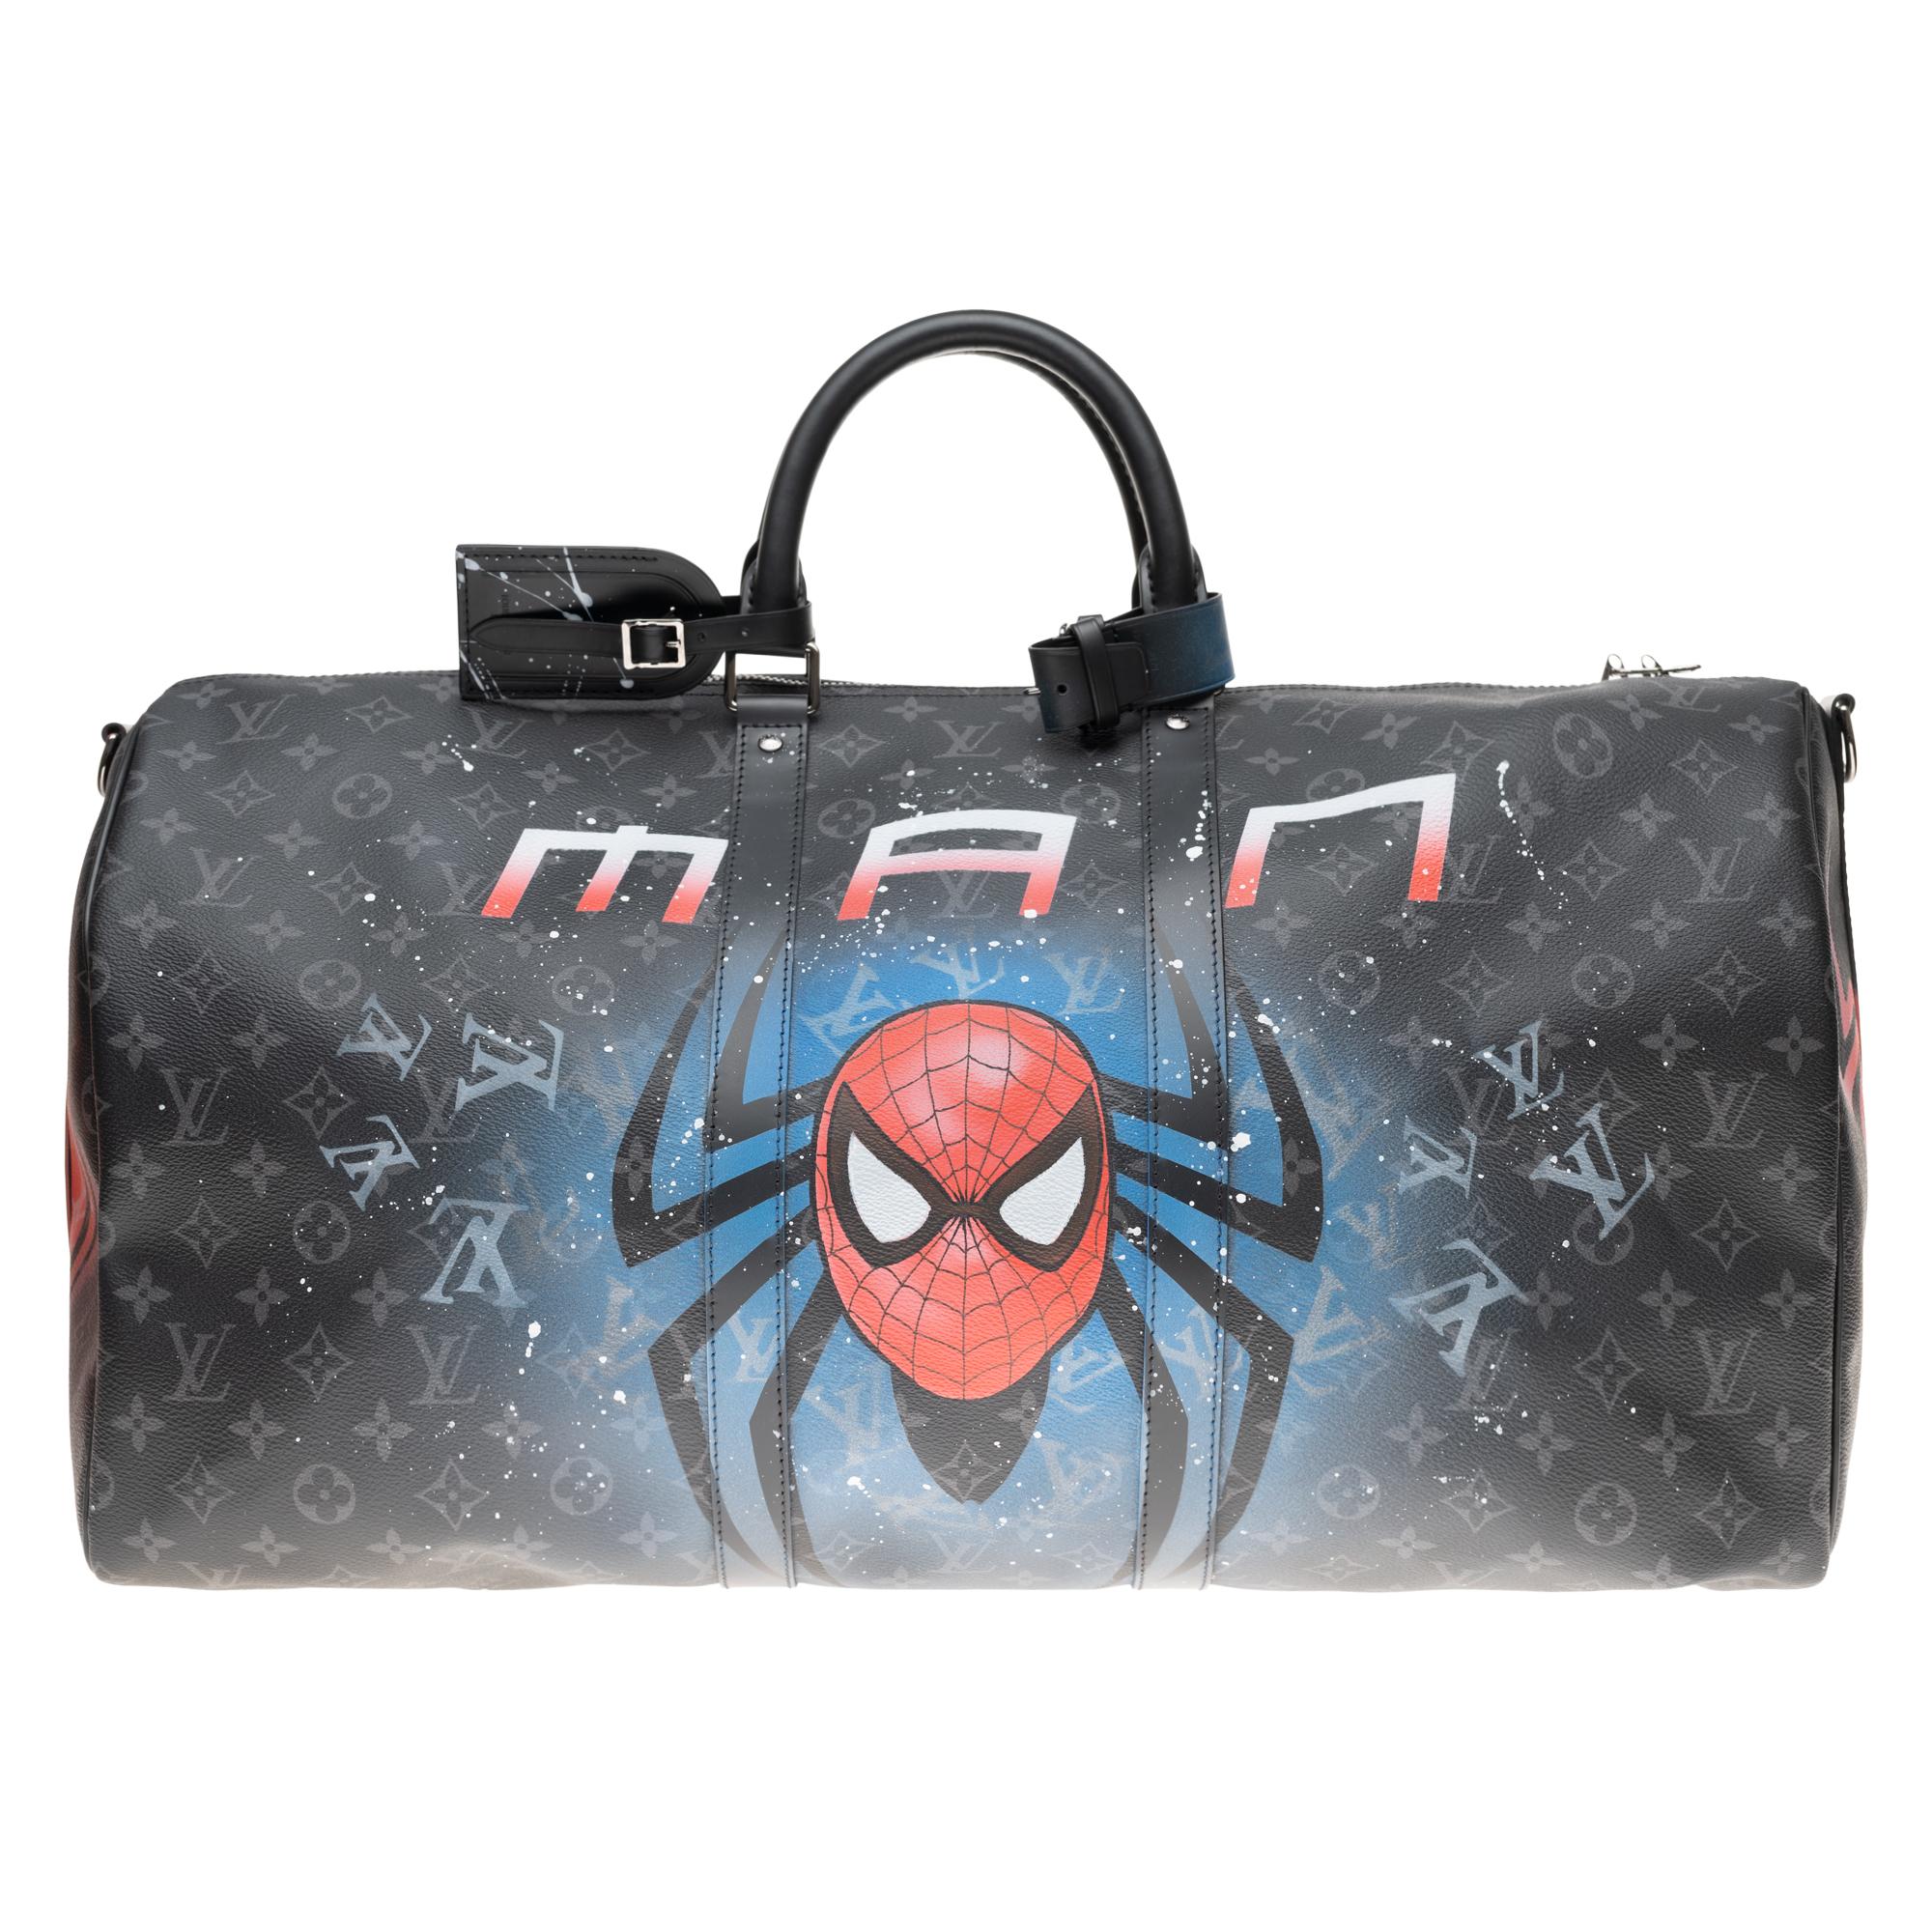 This ad is only for lovers of art and unique pieces, masterpieces because this is not only a bag but a unique piece.

This time our Street Art artist Patbo has realized a sublime work with the SPIDERBAG

This beautiful bag is more than a bag; it’s a